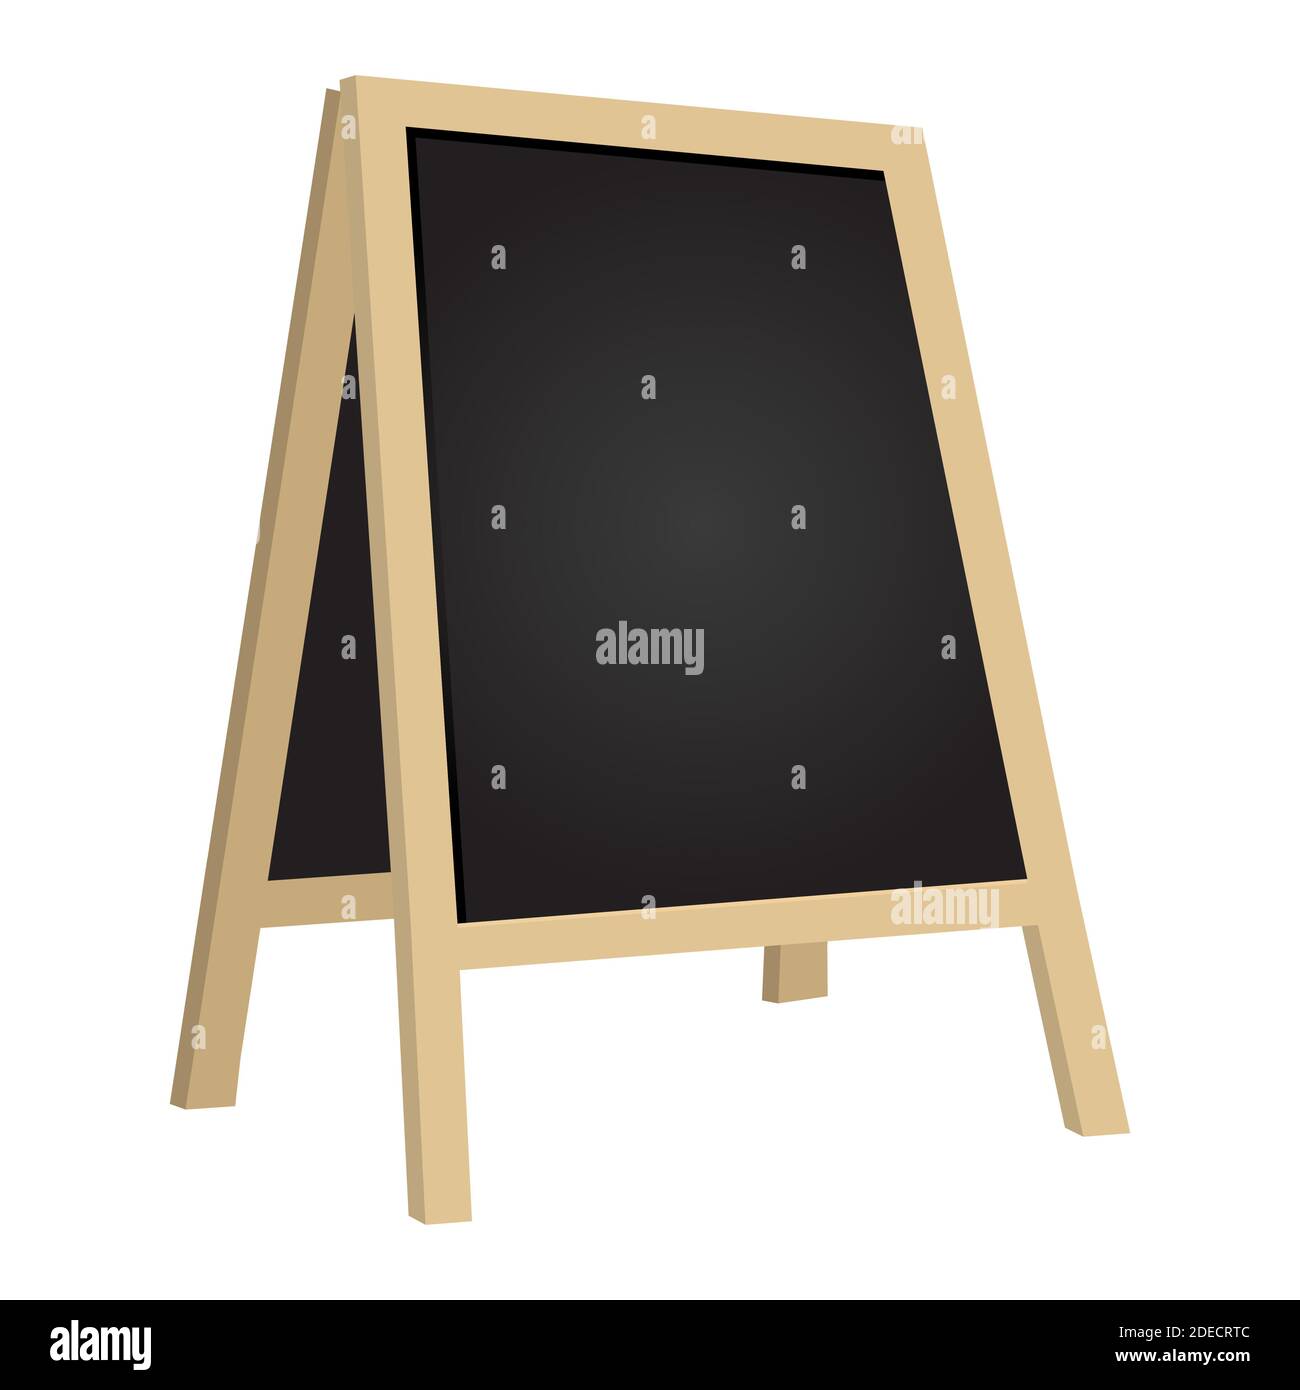 Street chalkboard isolated on white background. Empty cafes blackboard billboard illustration. Blank outside advertisement information display stand. Stock Vector